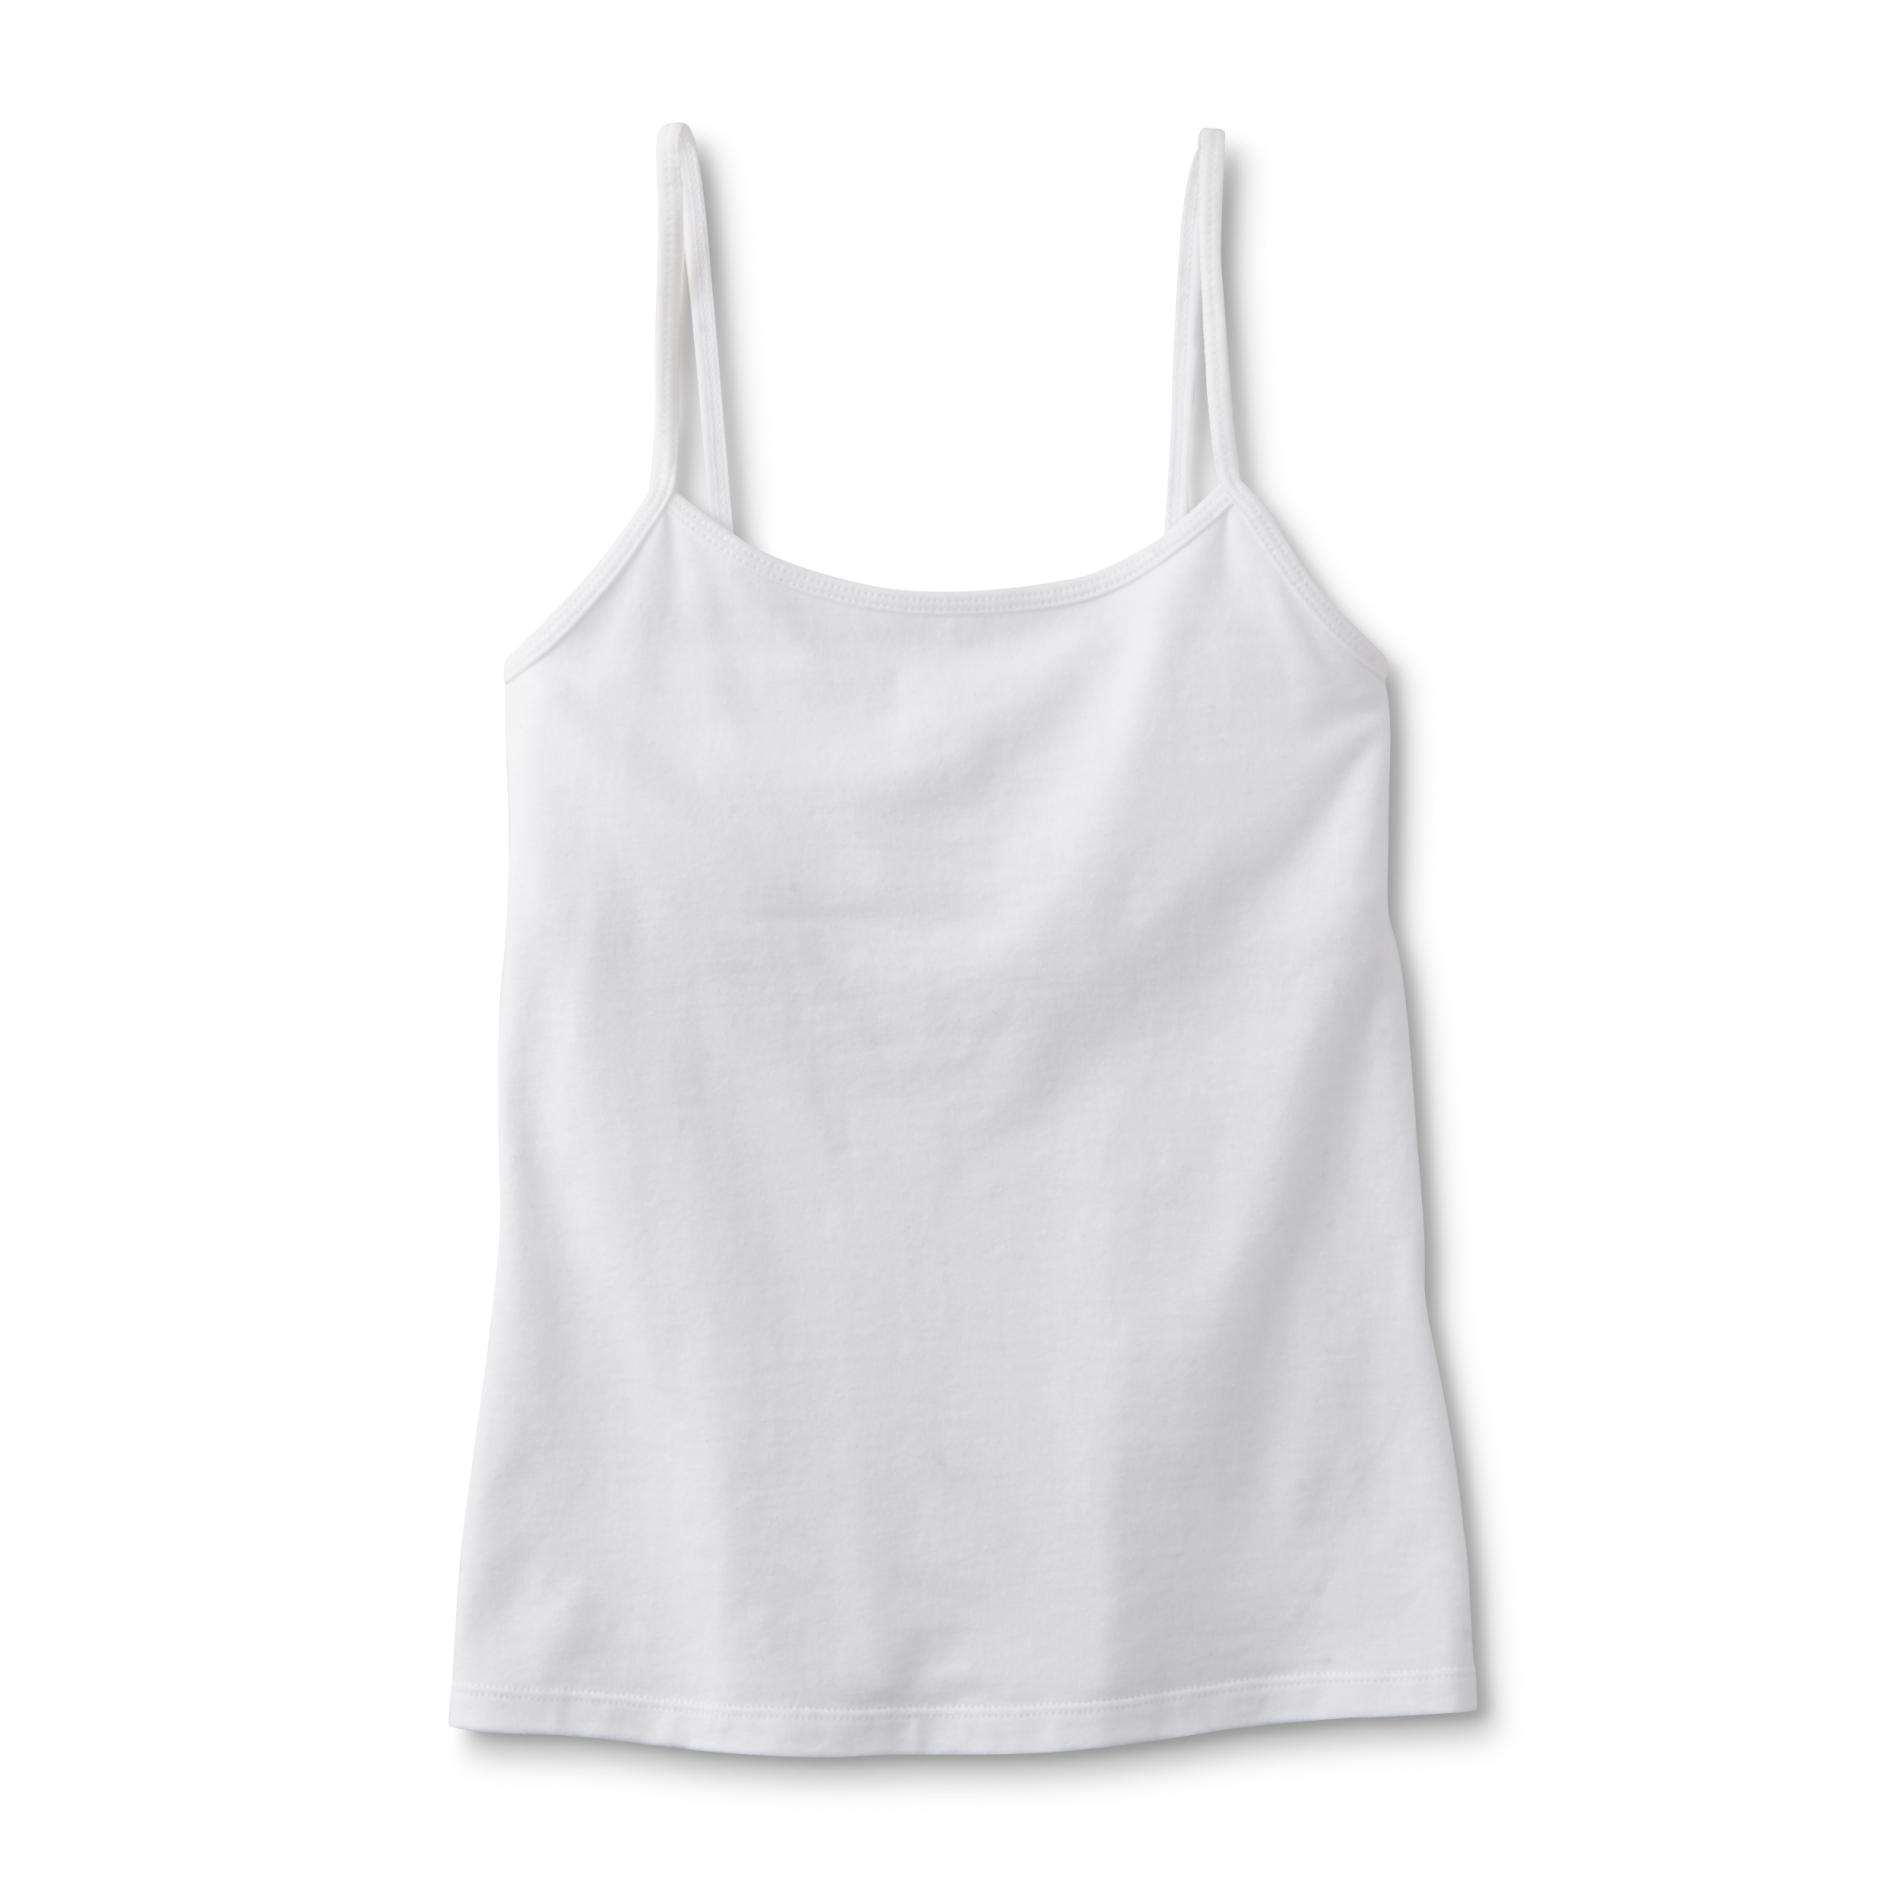 Basic Editions Girl's Camisole